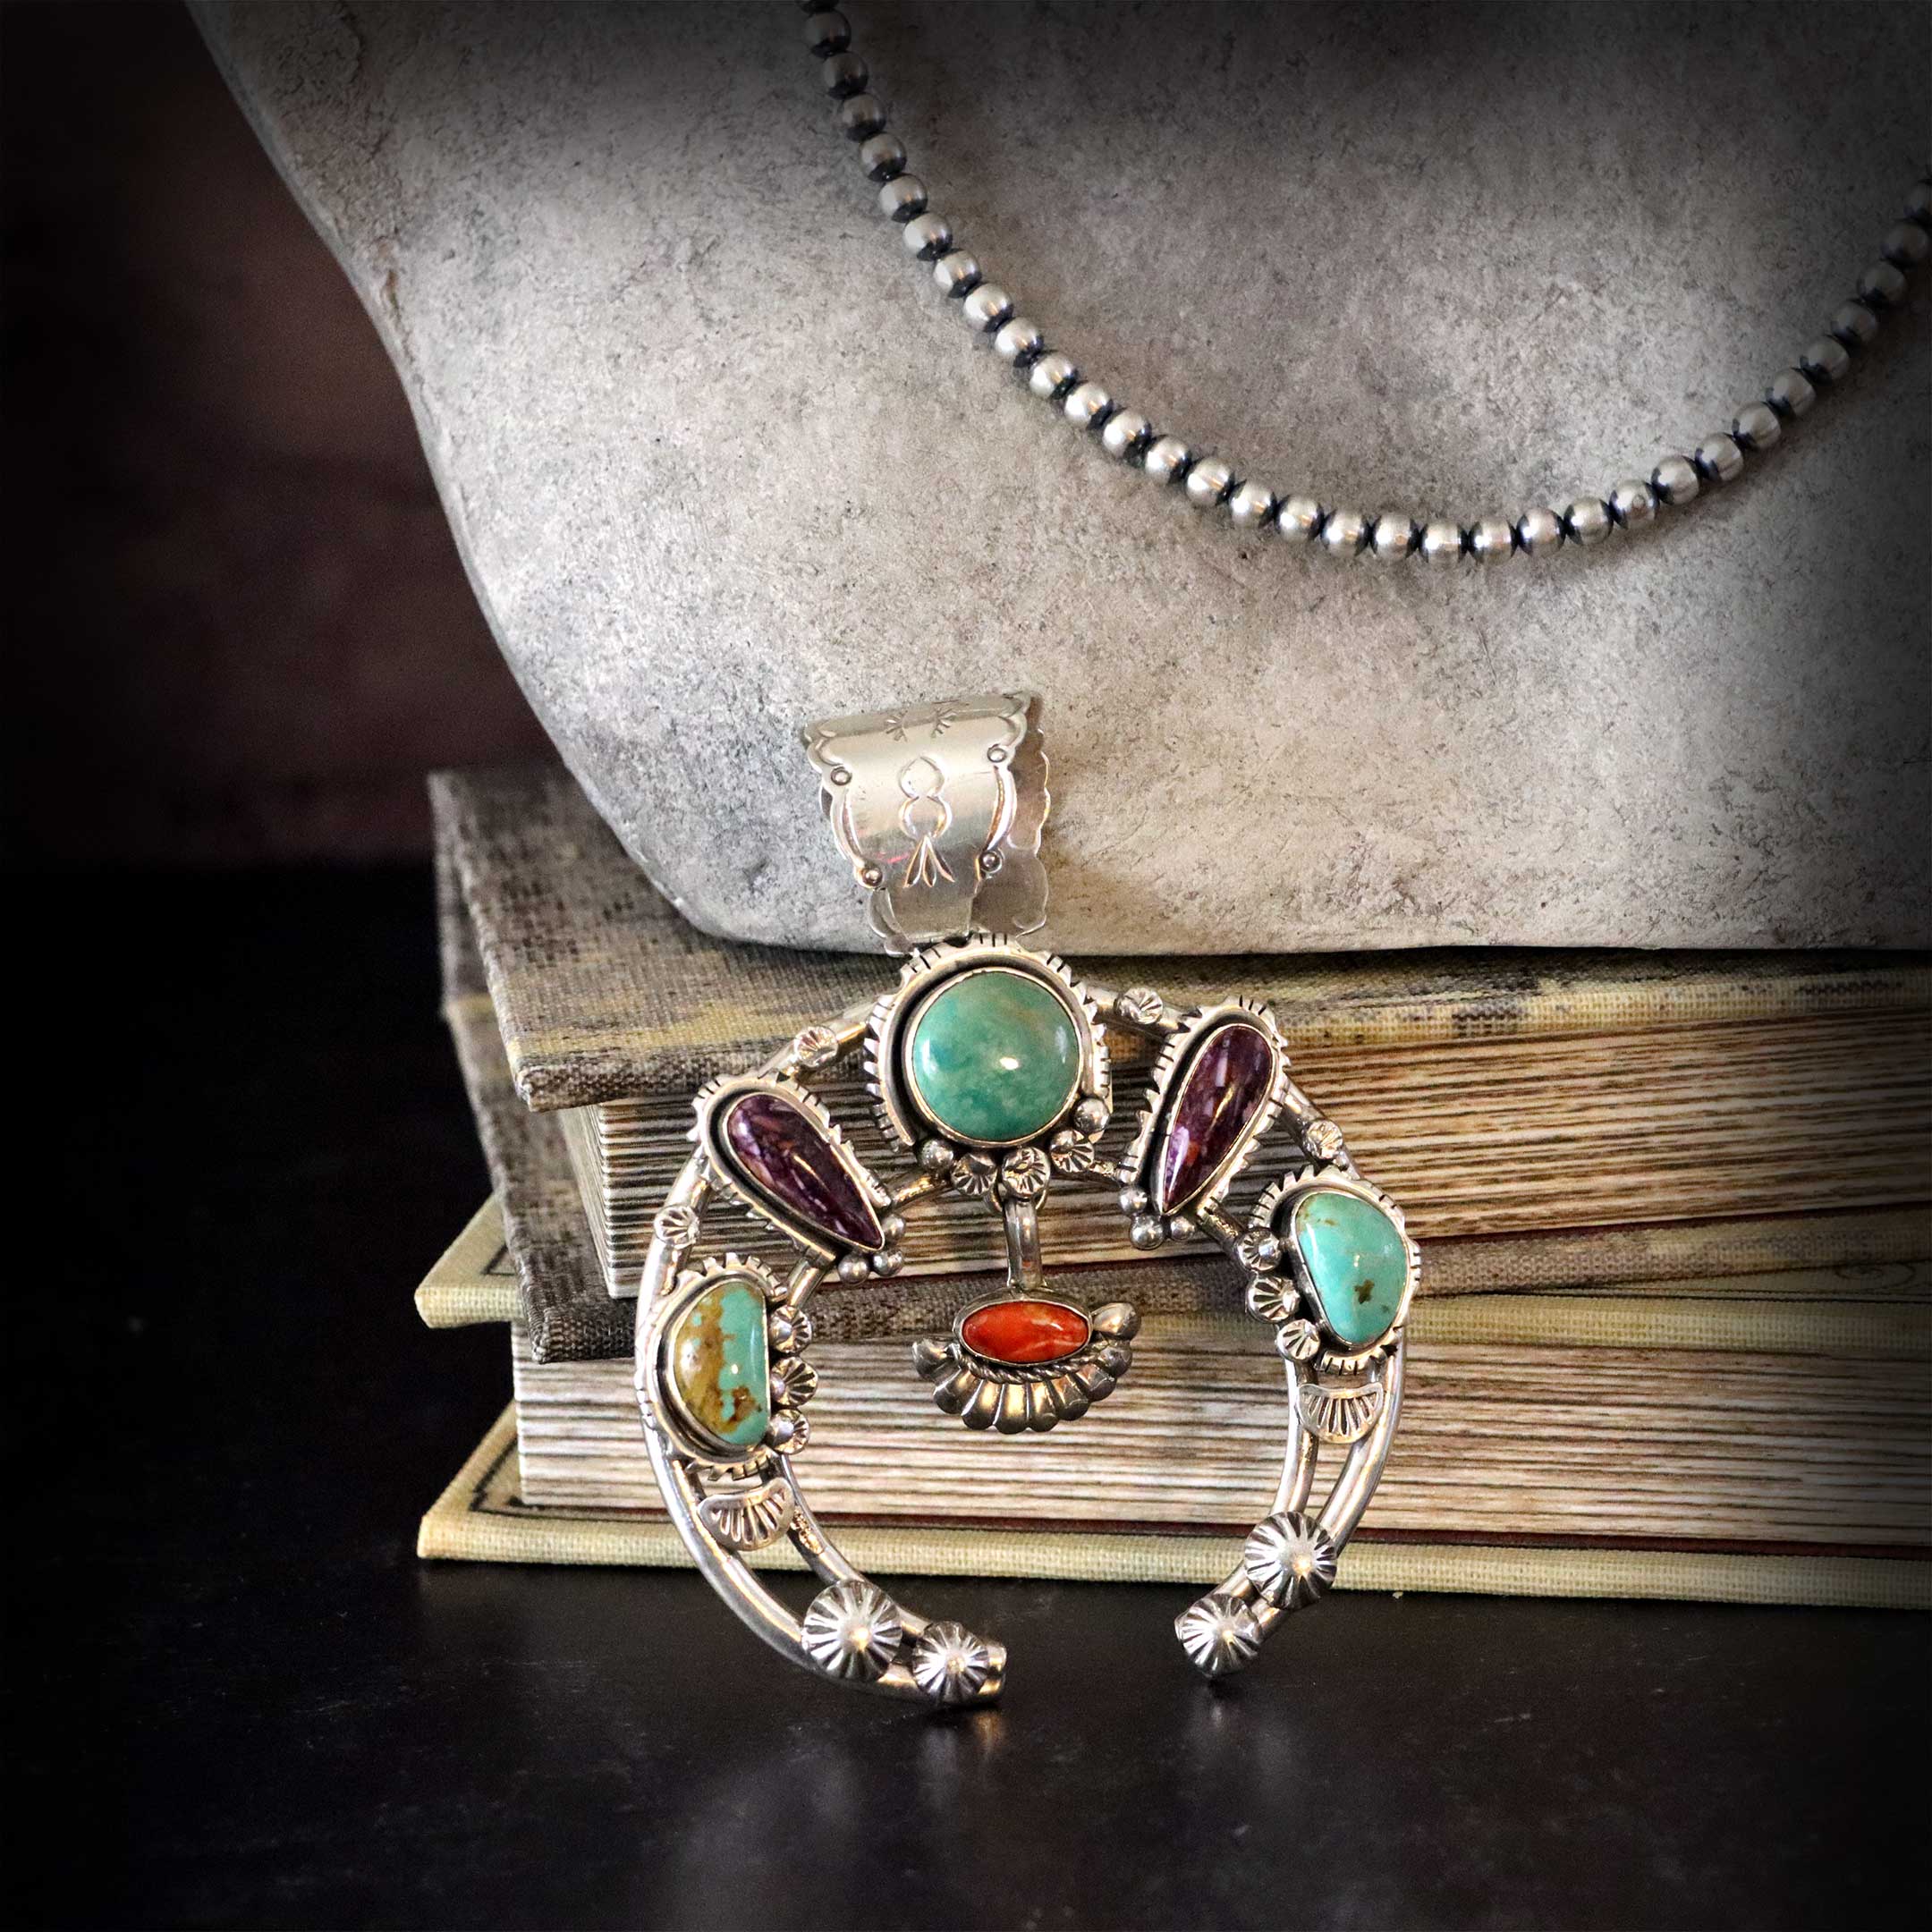 Spectacular Sterling Silver Naja with Multi Colored Stones